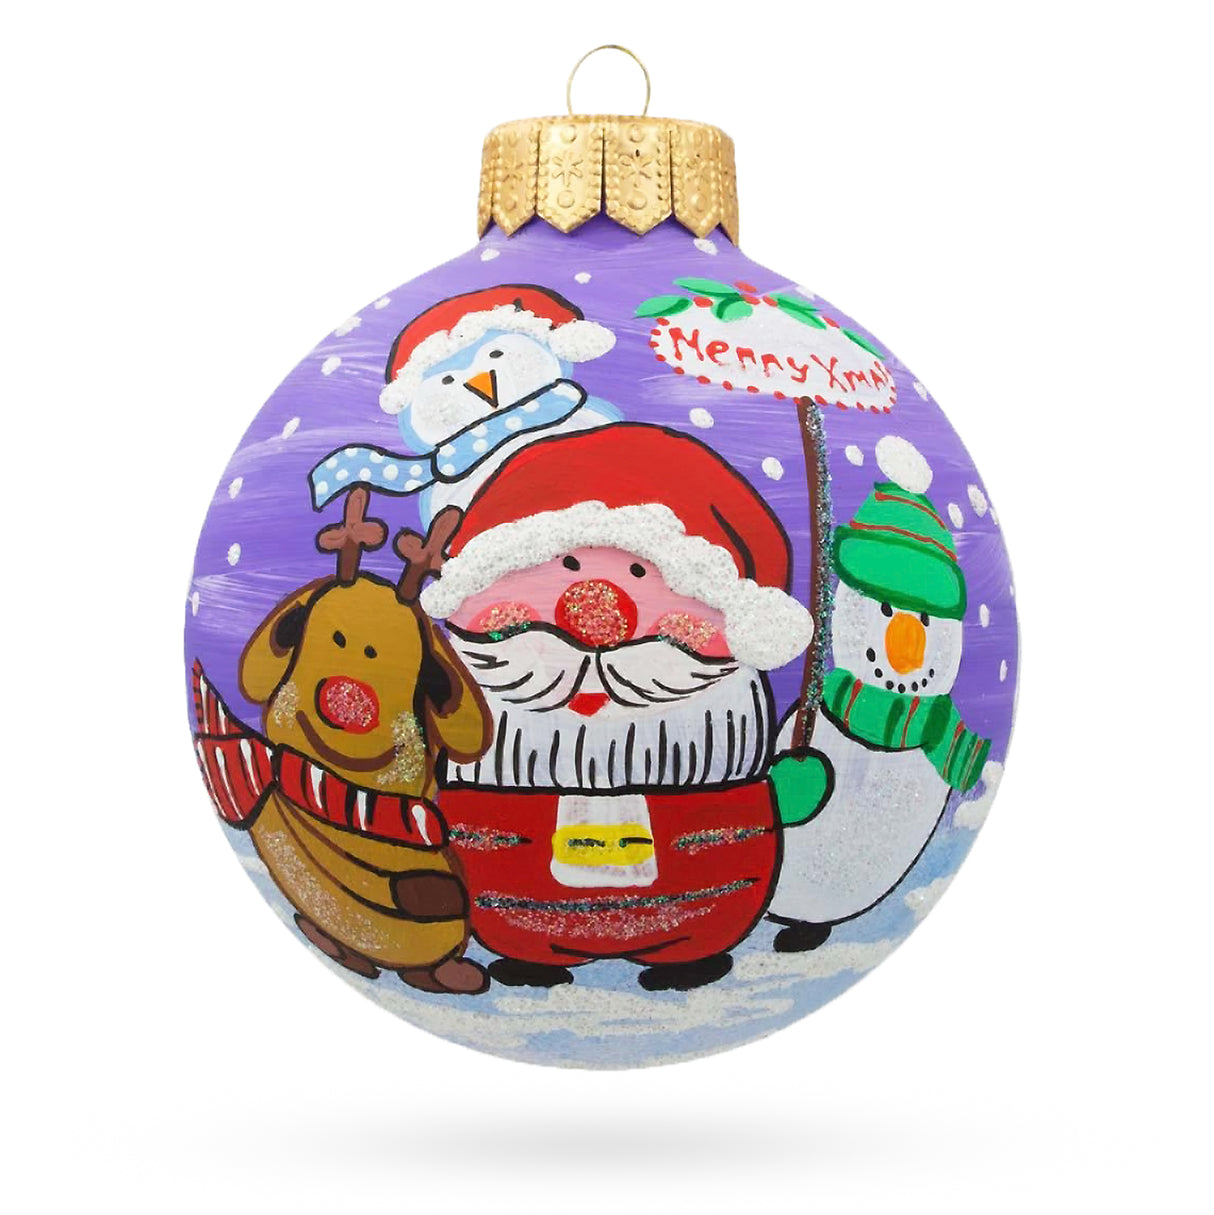 Glass Jolly Trio: Santa, Reindeer, and Snowman Friends - Blown Glass Ball Christmas Ornament 3.25 Inches in Purple color Round